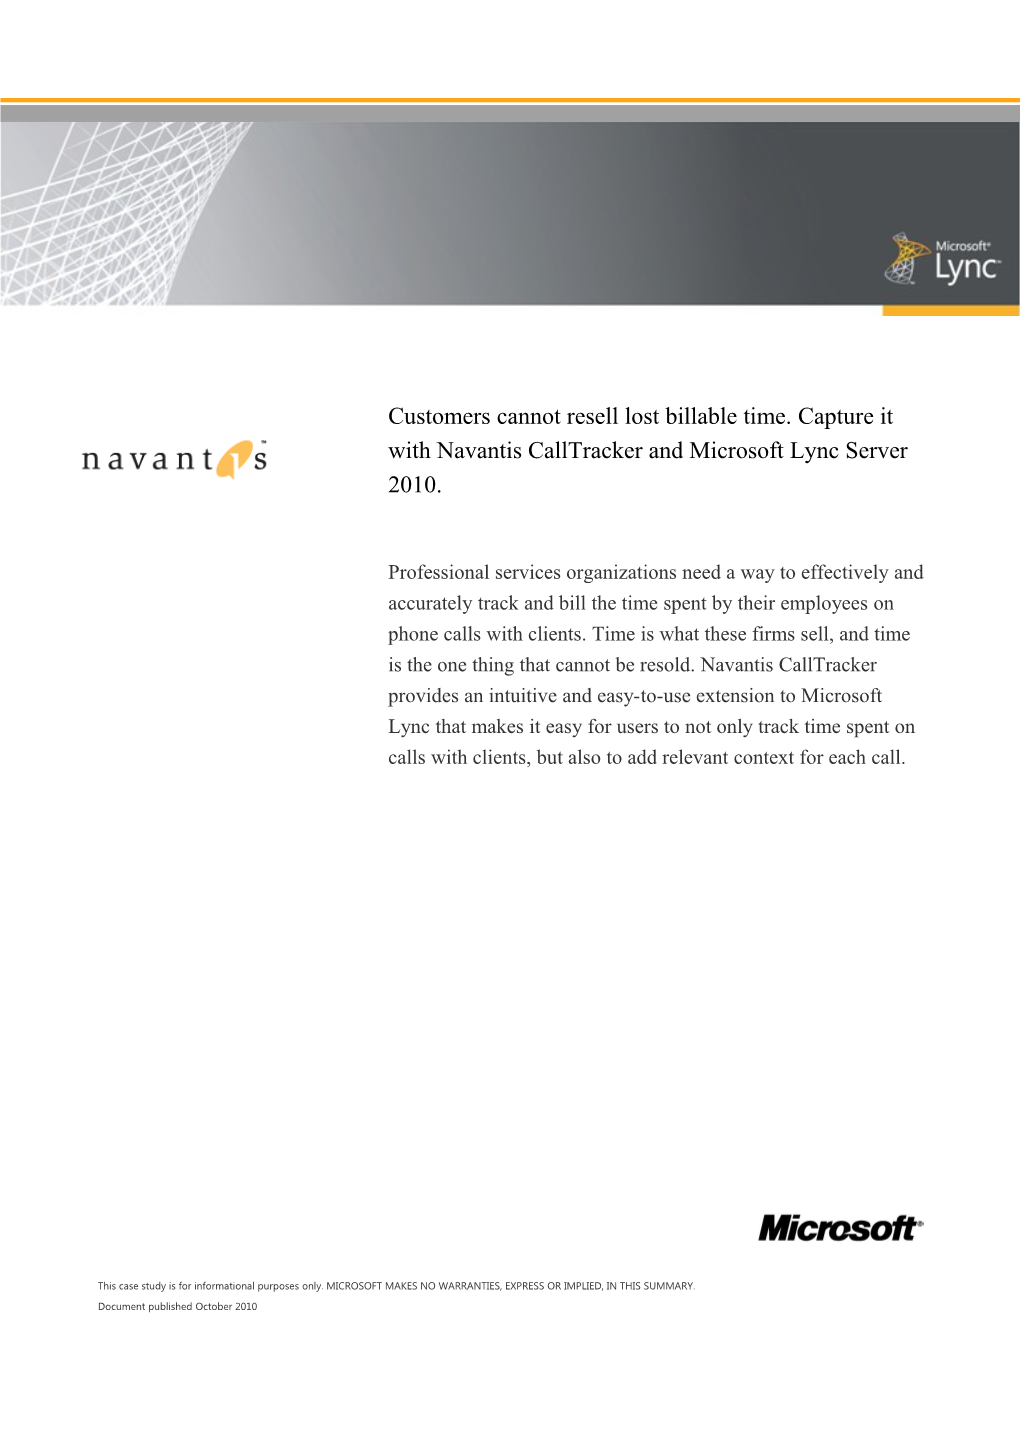 Customers Cannot Resell Lost Billable Time. Capture It with Navantis Calltracker and Microsoft